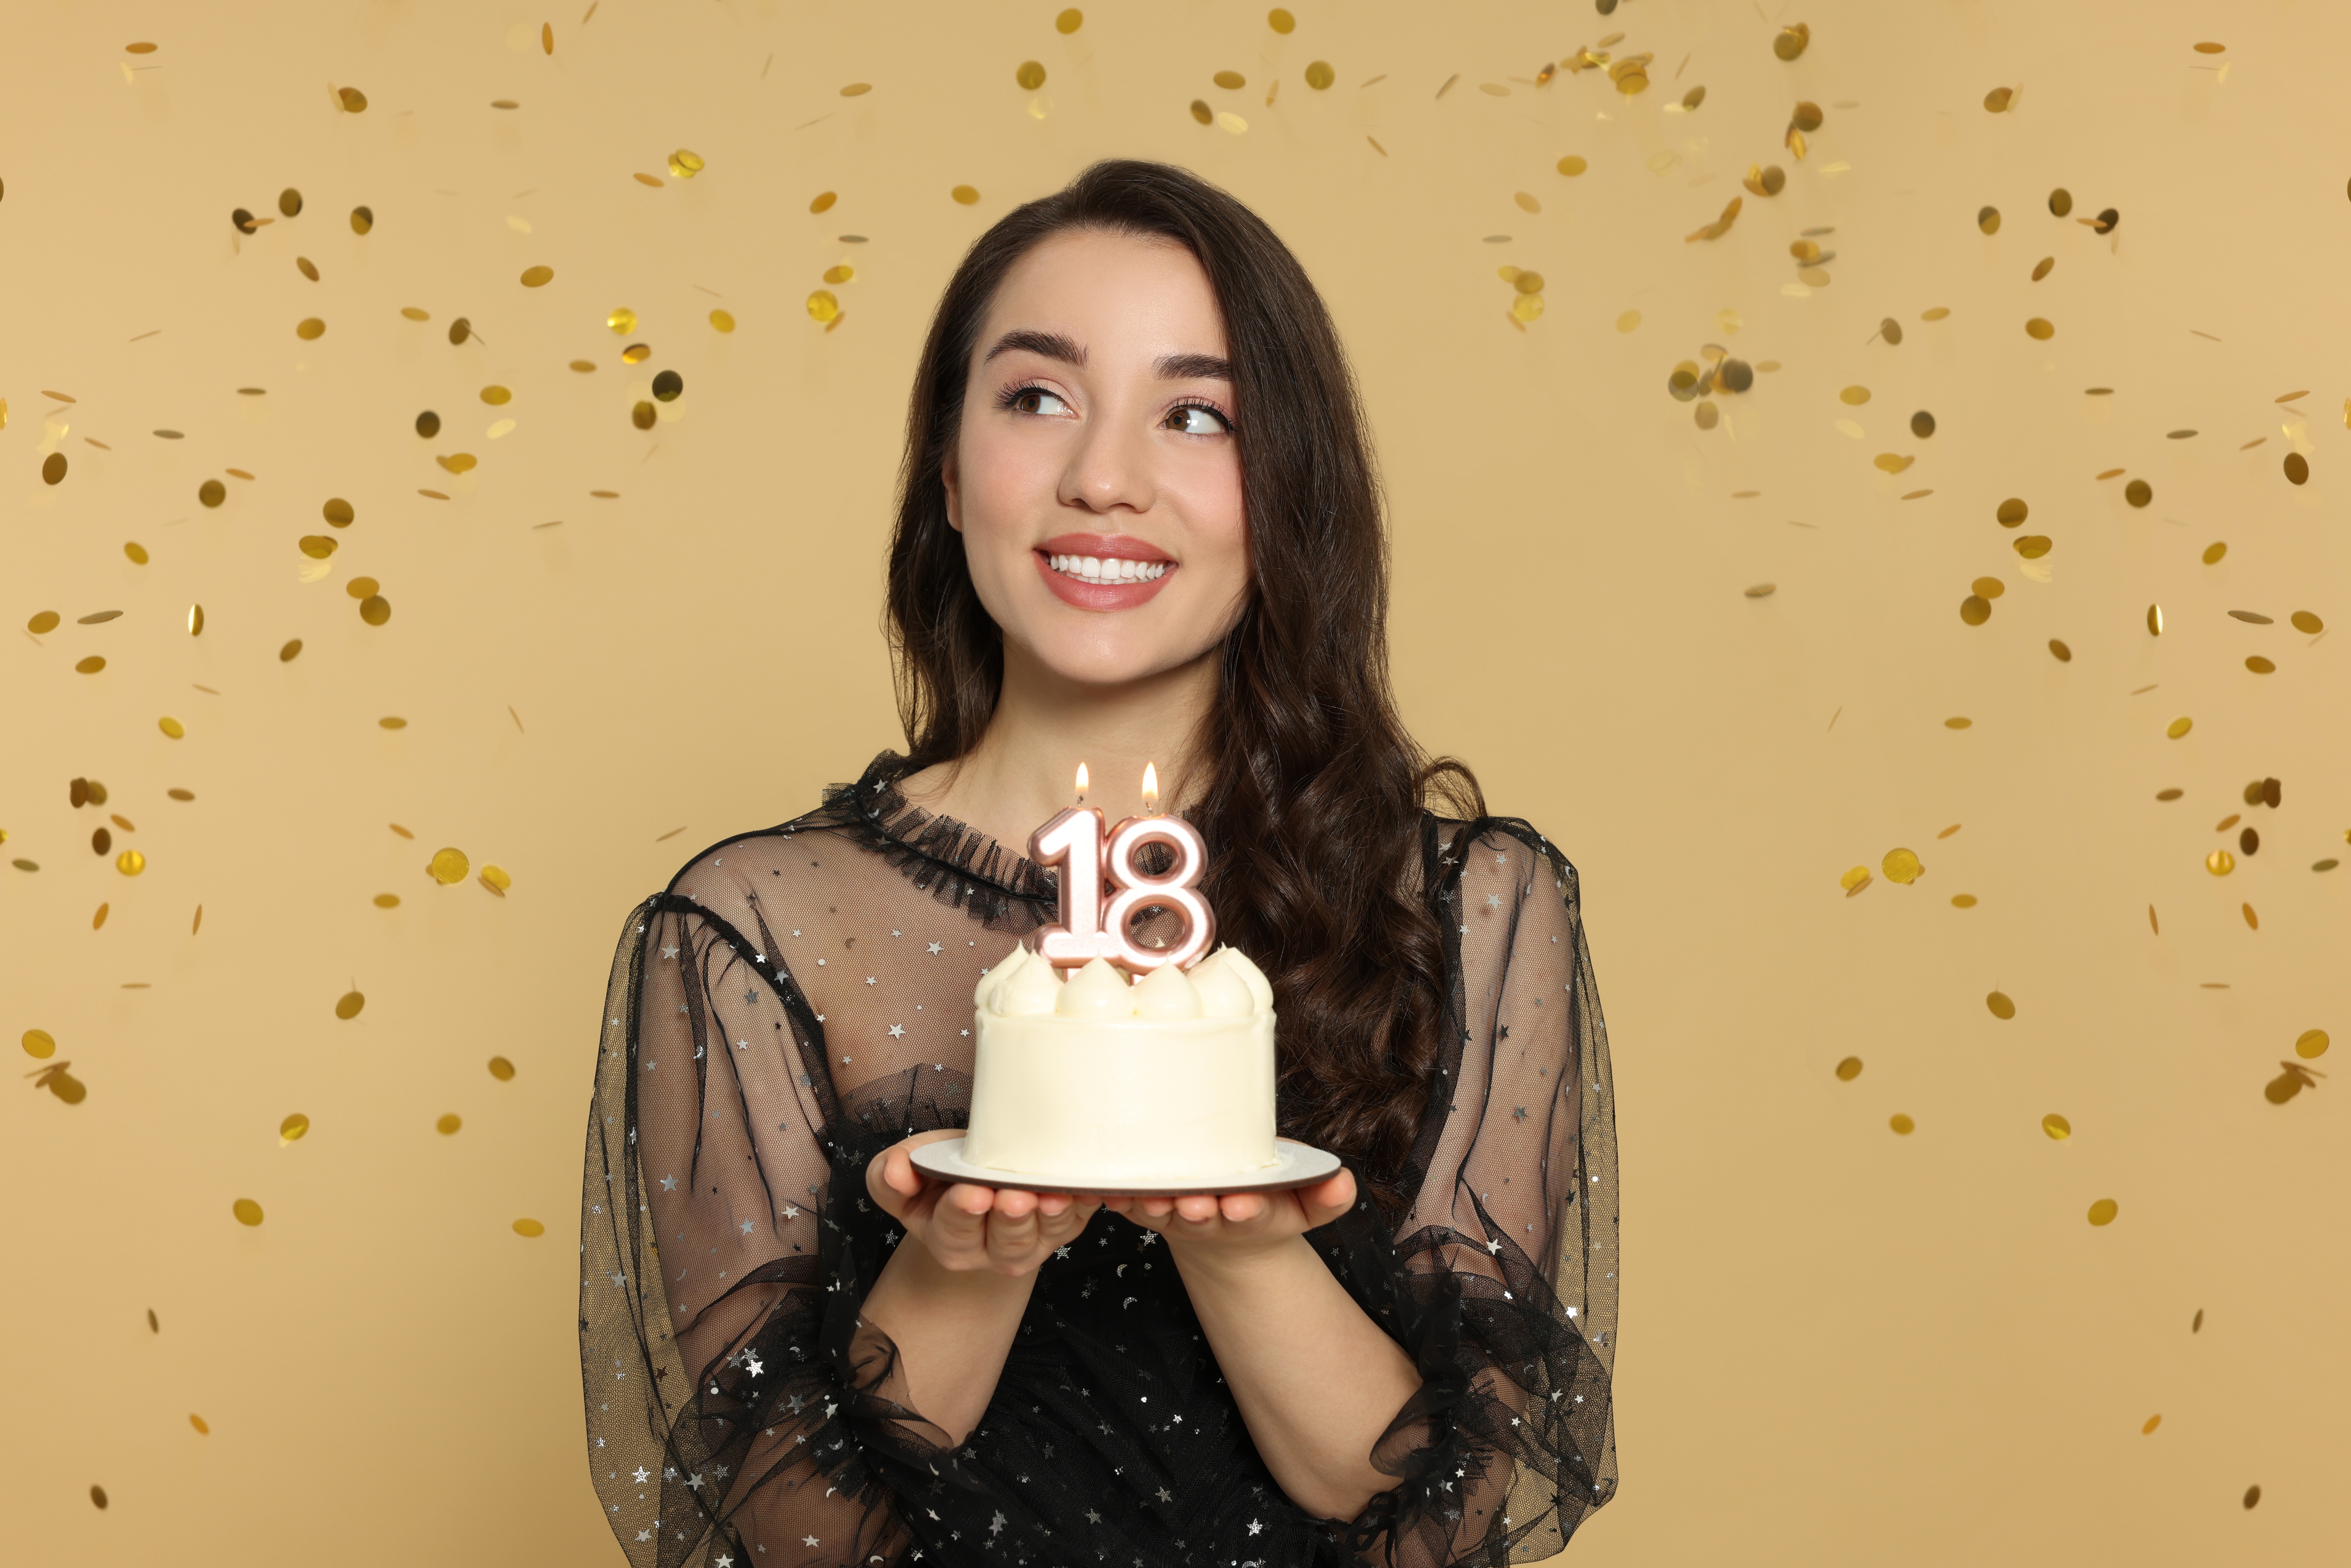 A young woman holding her 18th birthday cake | Source: Shutterstock